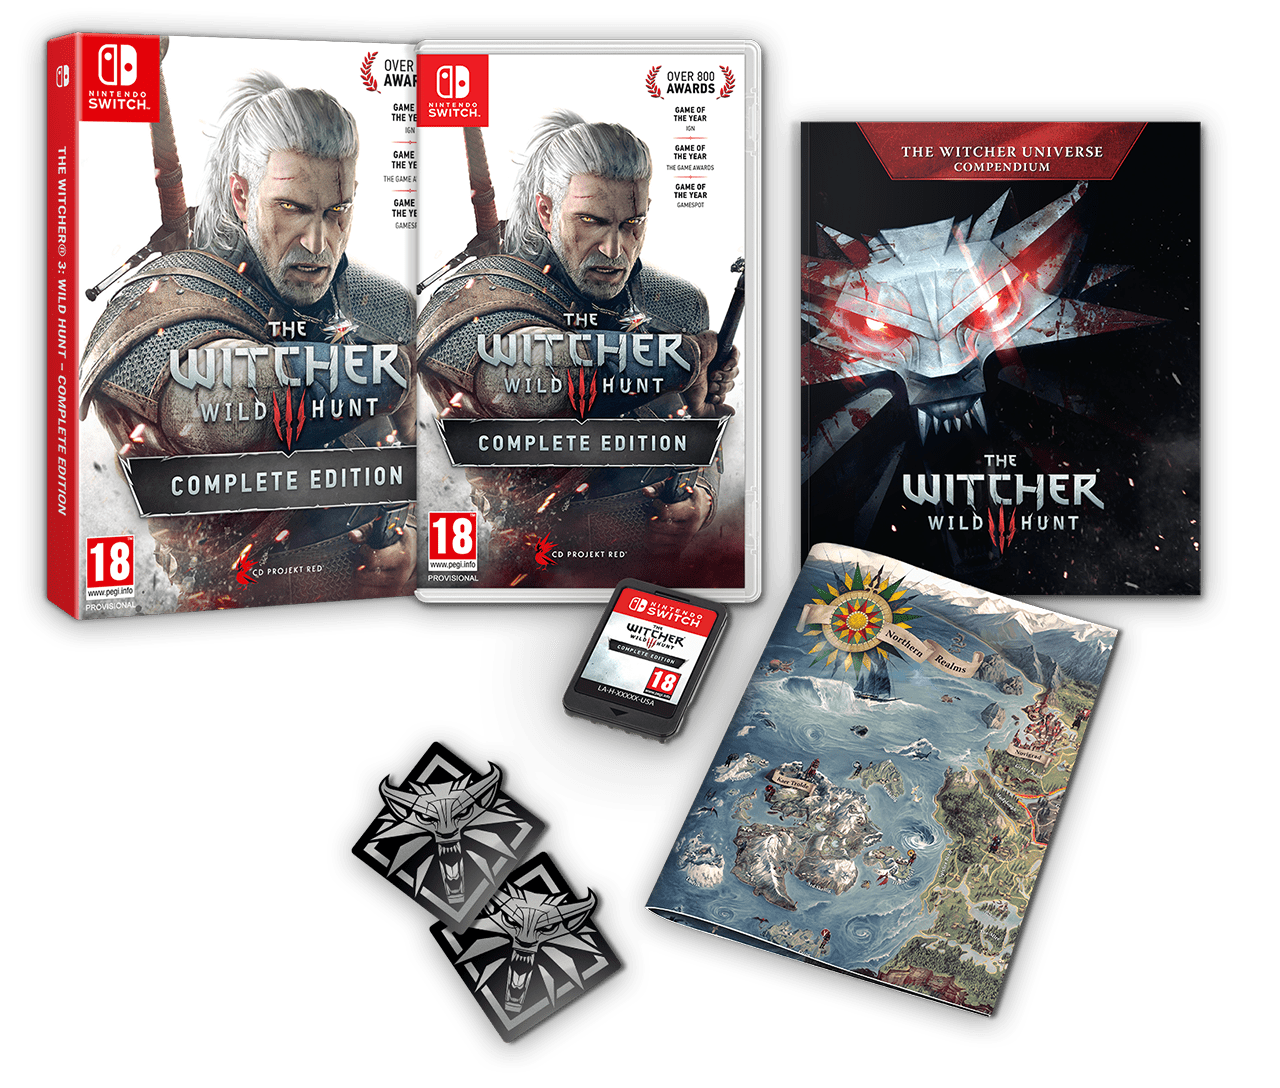 The Witcher 3 Coming to Switch - RPGamer